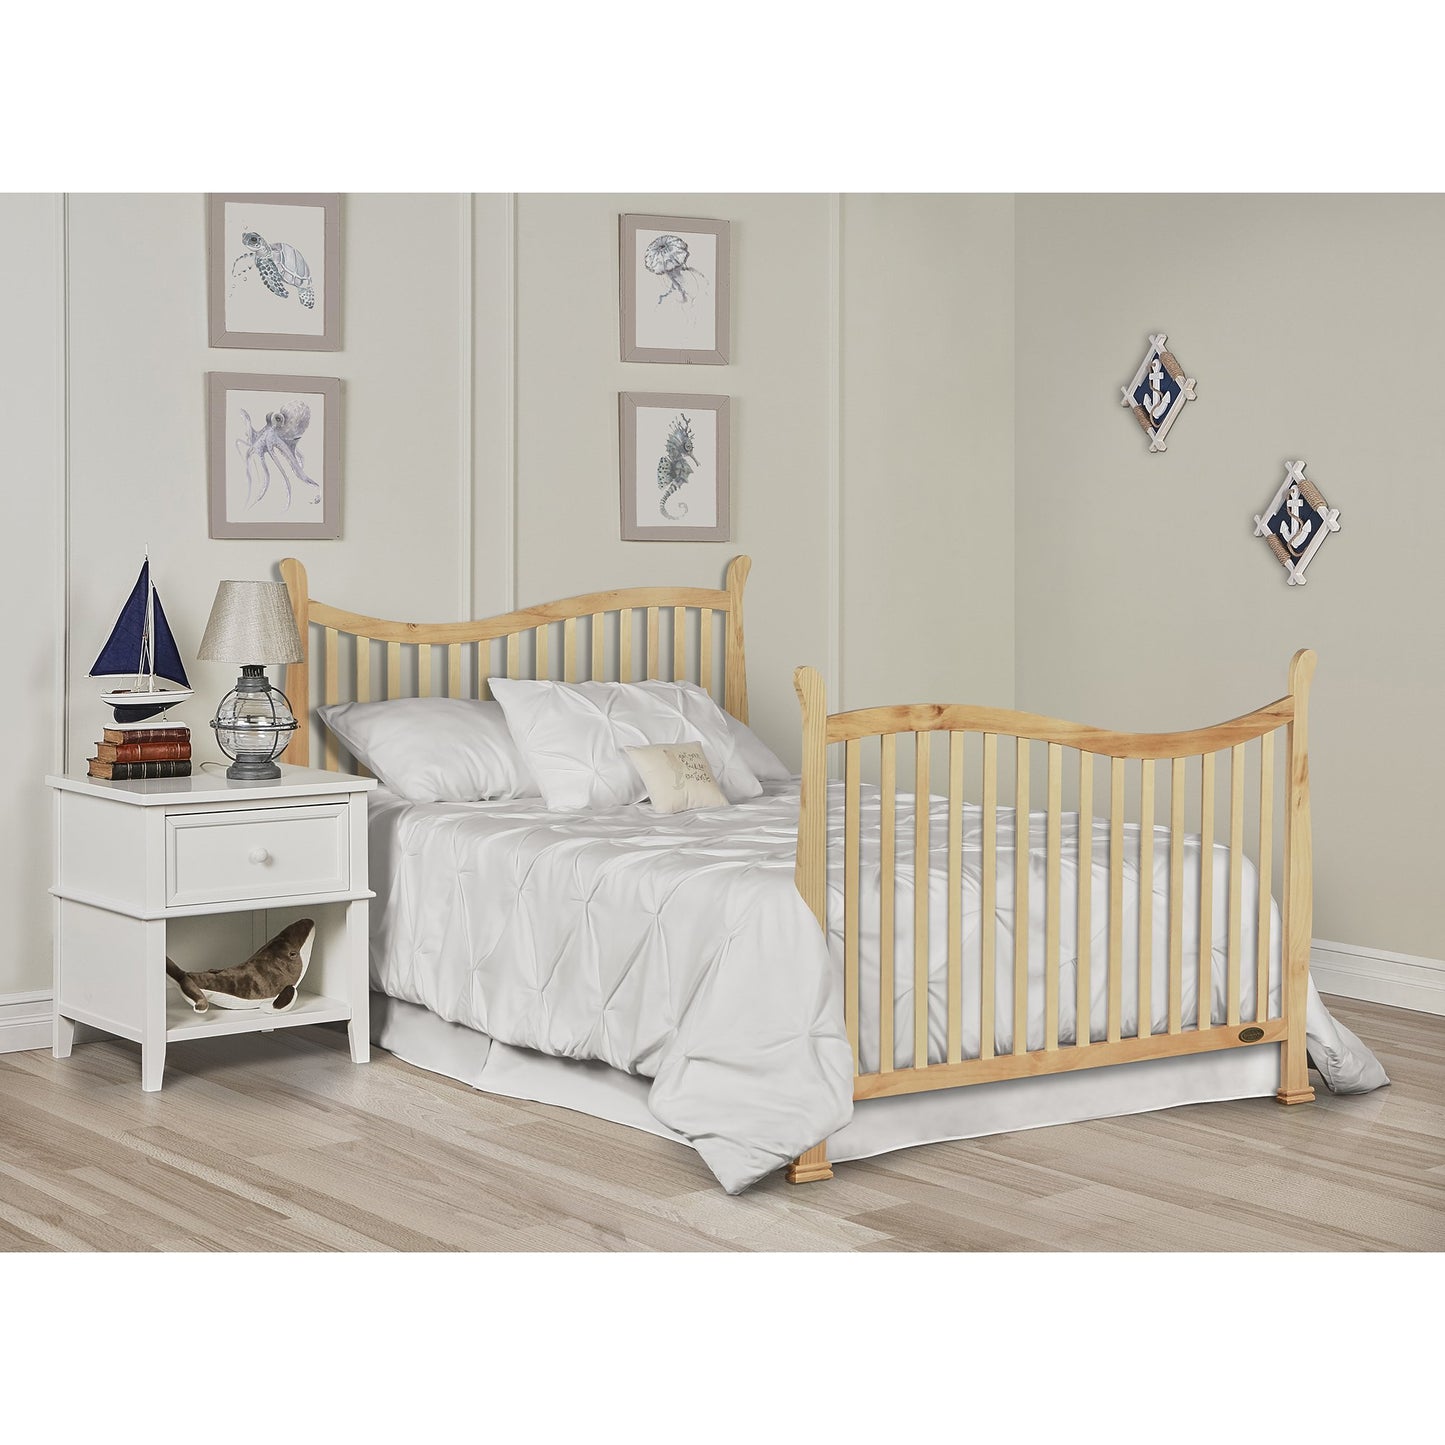 Dream On Me Violet 7-In-1 Convertible Life Style Crib In Natural, Greenguard Gold Certified, 4 Mattress Height Settings, Made Of Sustainable New